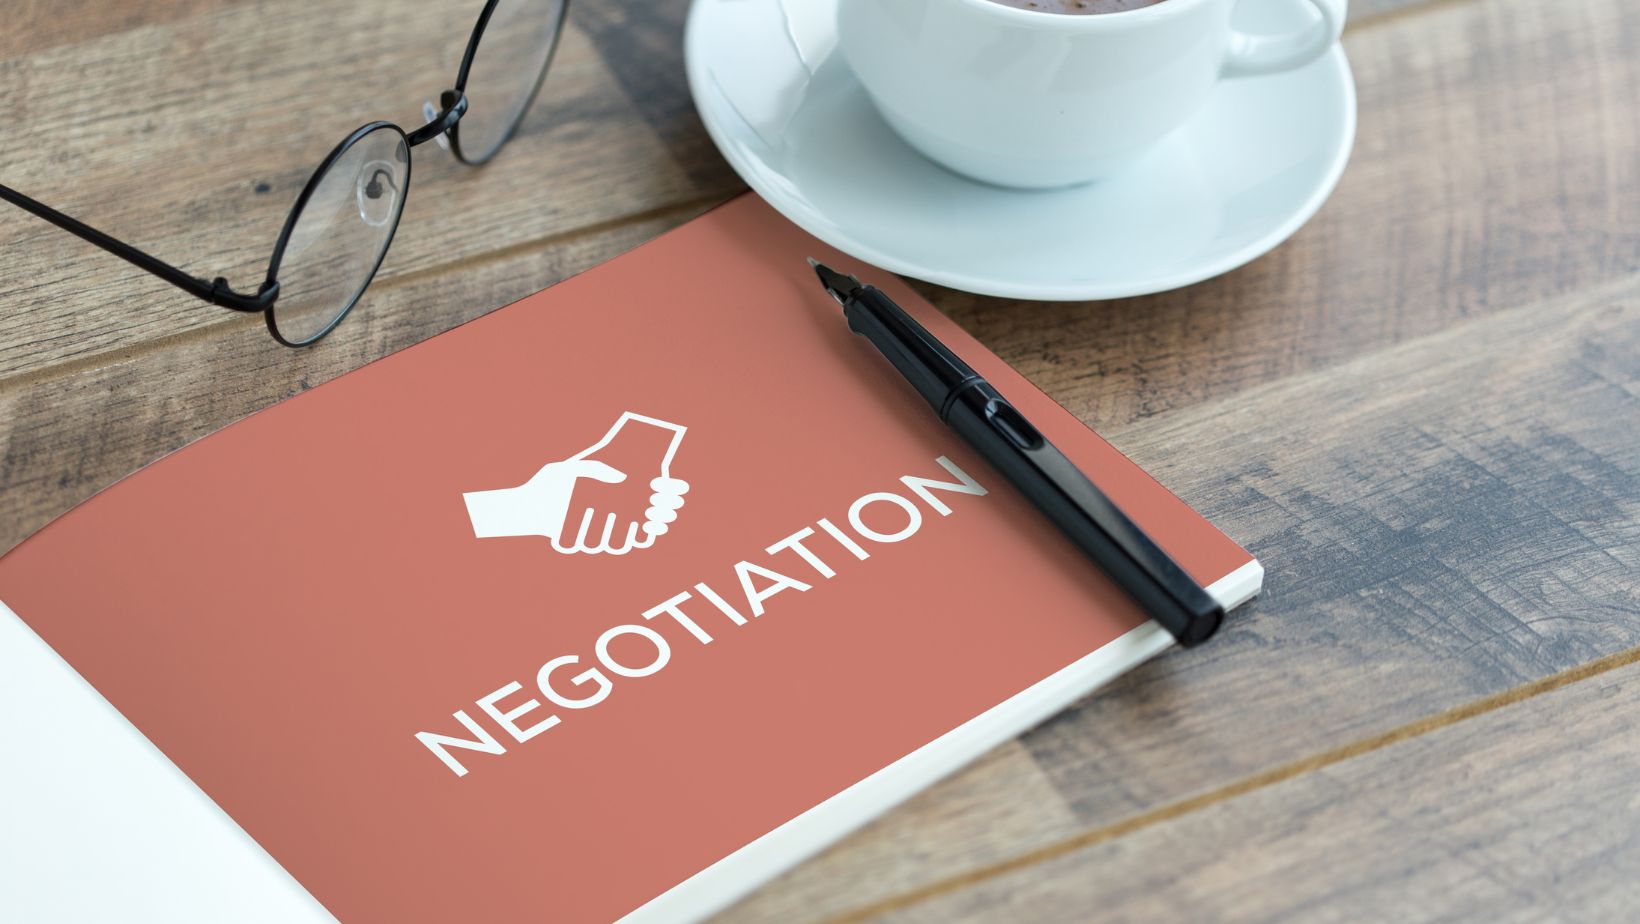 which general staff member negotiates and monitors contracts